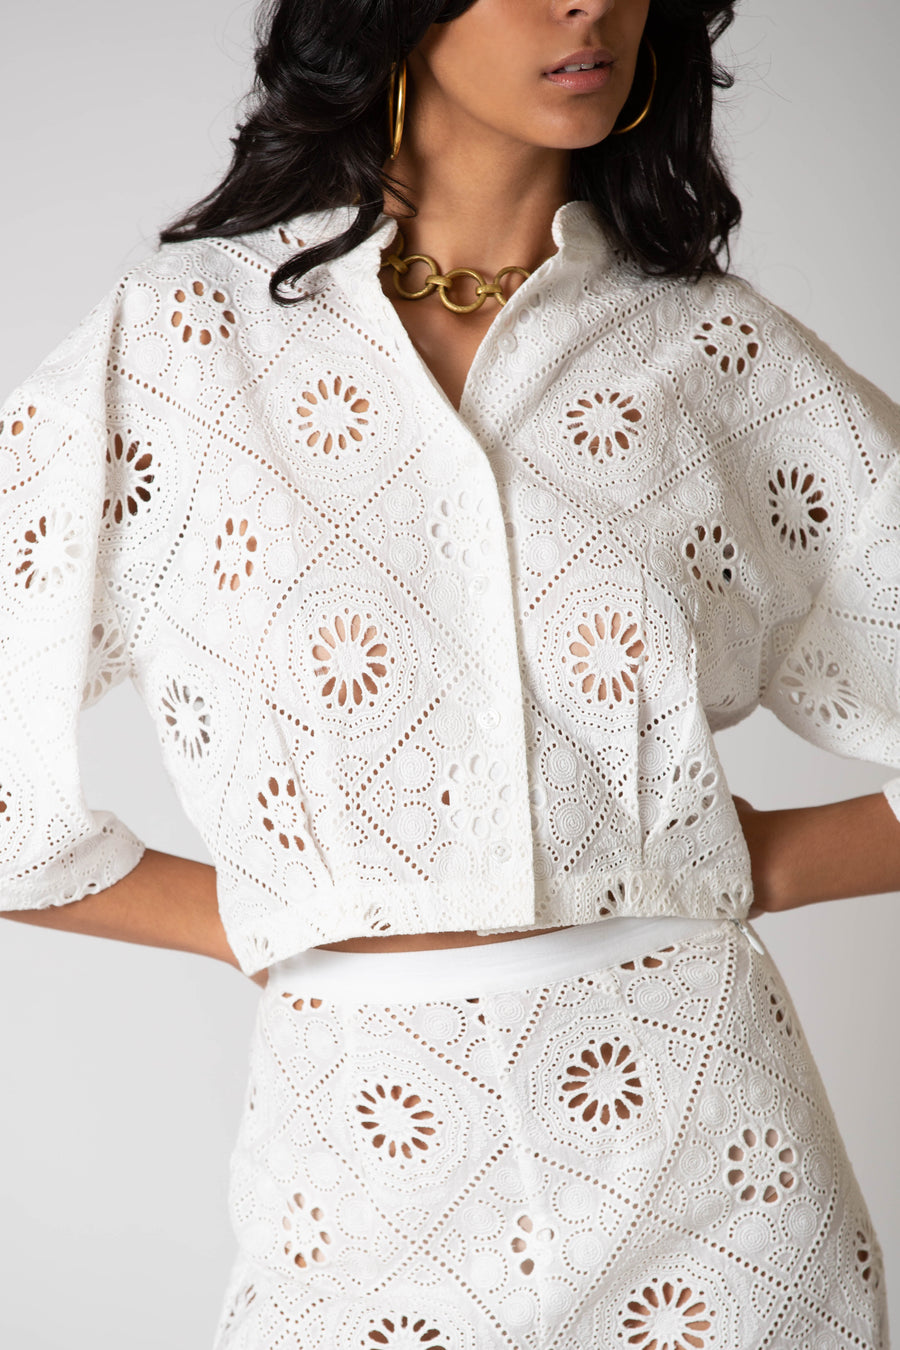 This is a close-up photo of a woman posing in matching, white embroidered top and pants.